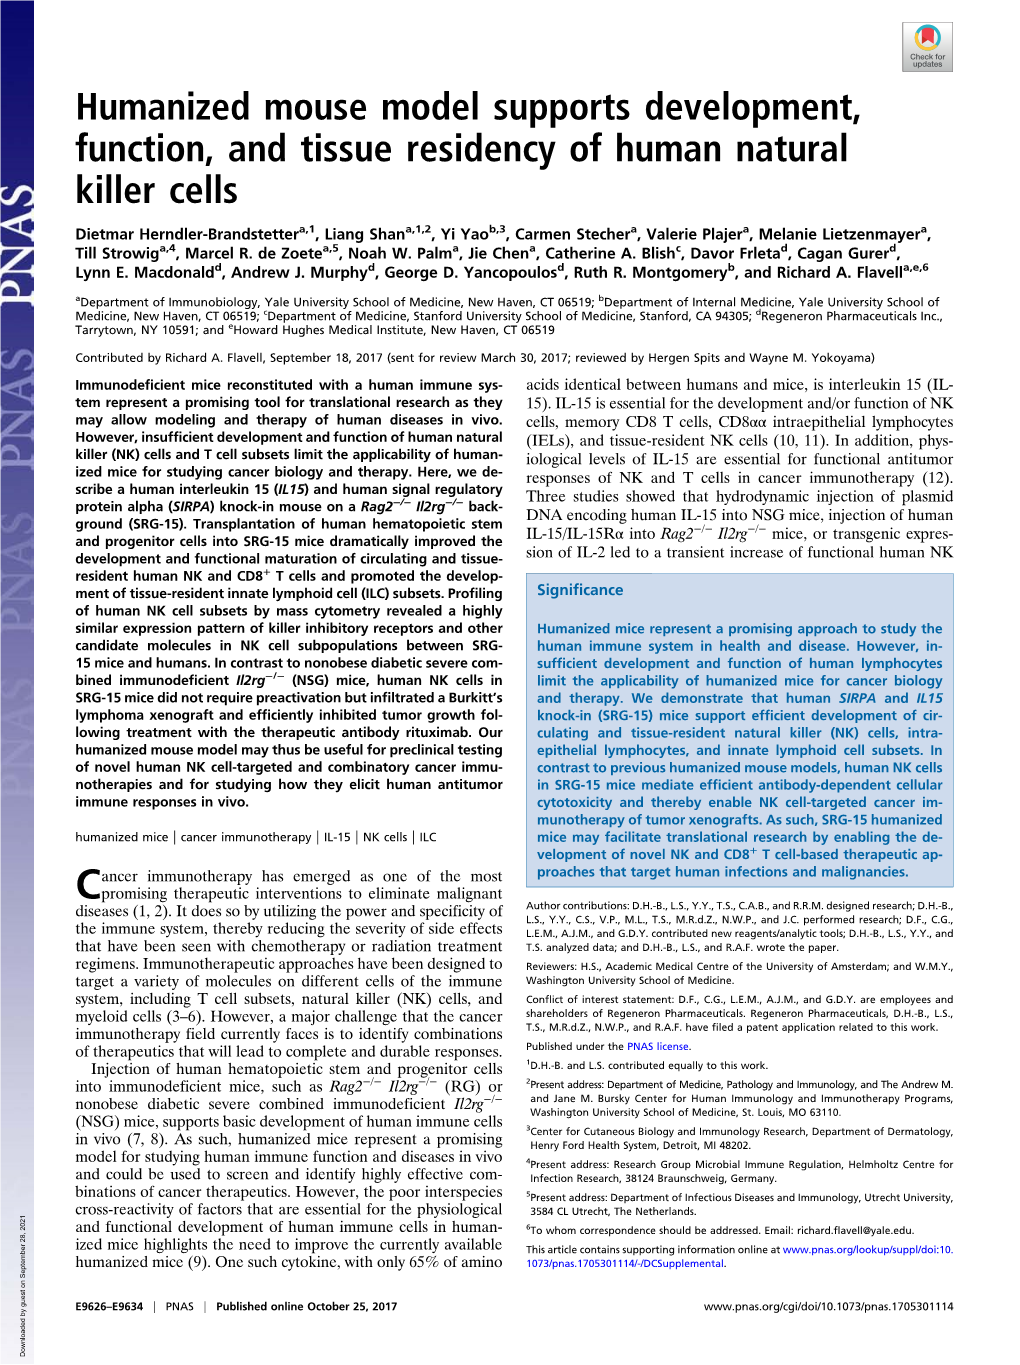 Humanized Mouse Model Supports Development, Function, and Tissue Residency of Human Natural Killer Cells